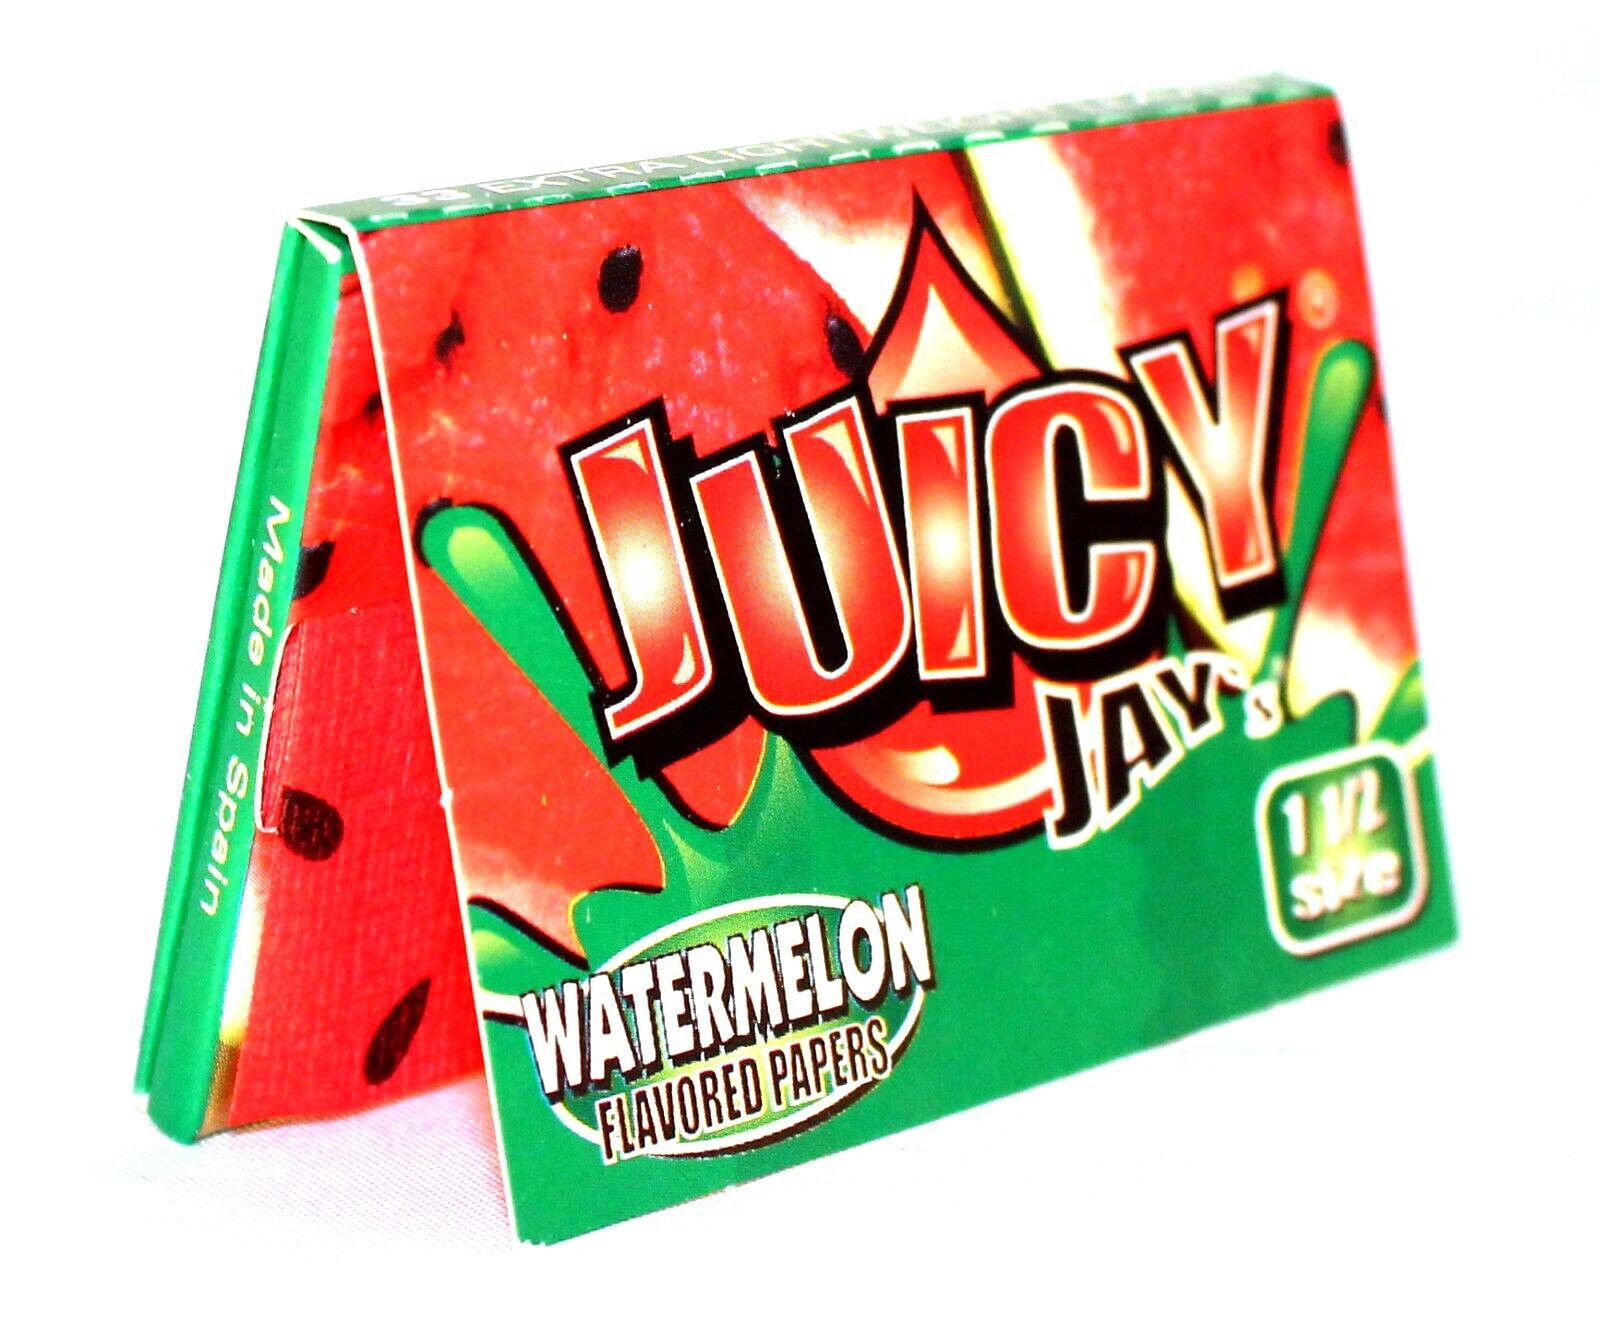 6 packs 1.5 size Juicy Jay\'s Watermelon Flavored Cigarette Rolling Papers 1 1/2